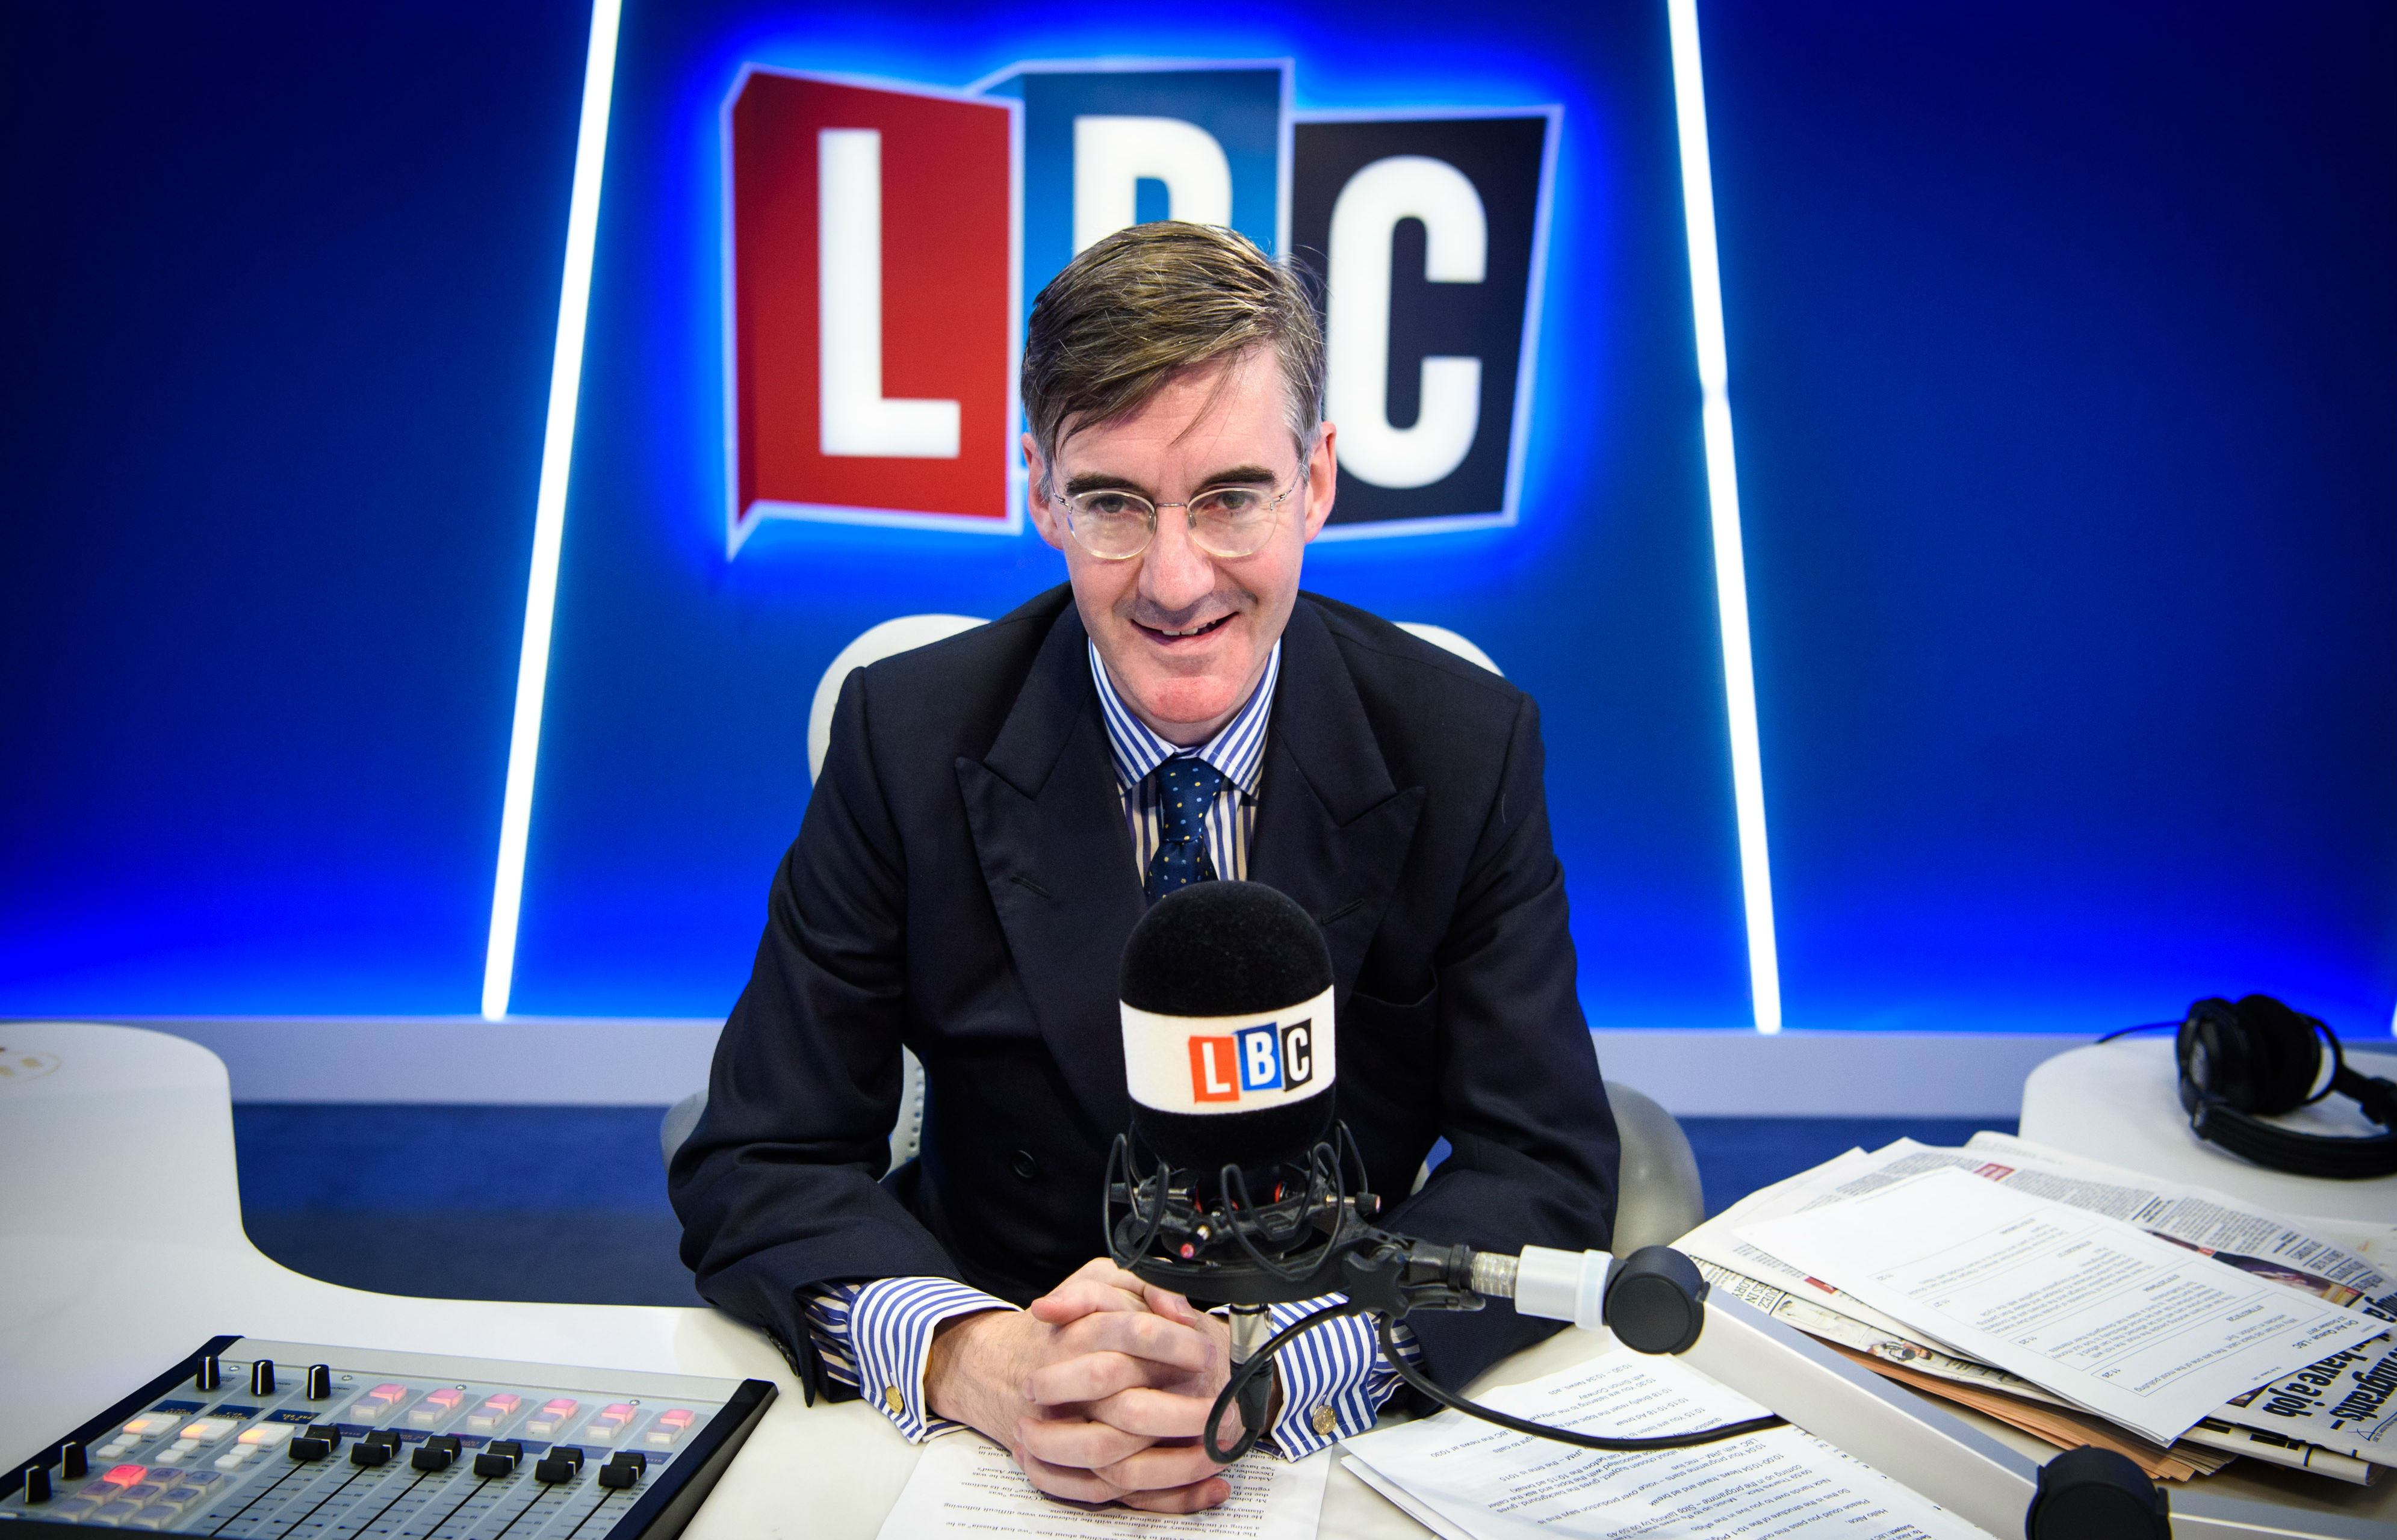 Jacob Rees-Mogg on LBC radio: 11 highlights from the show 